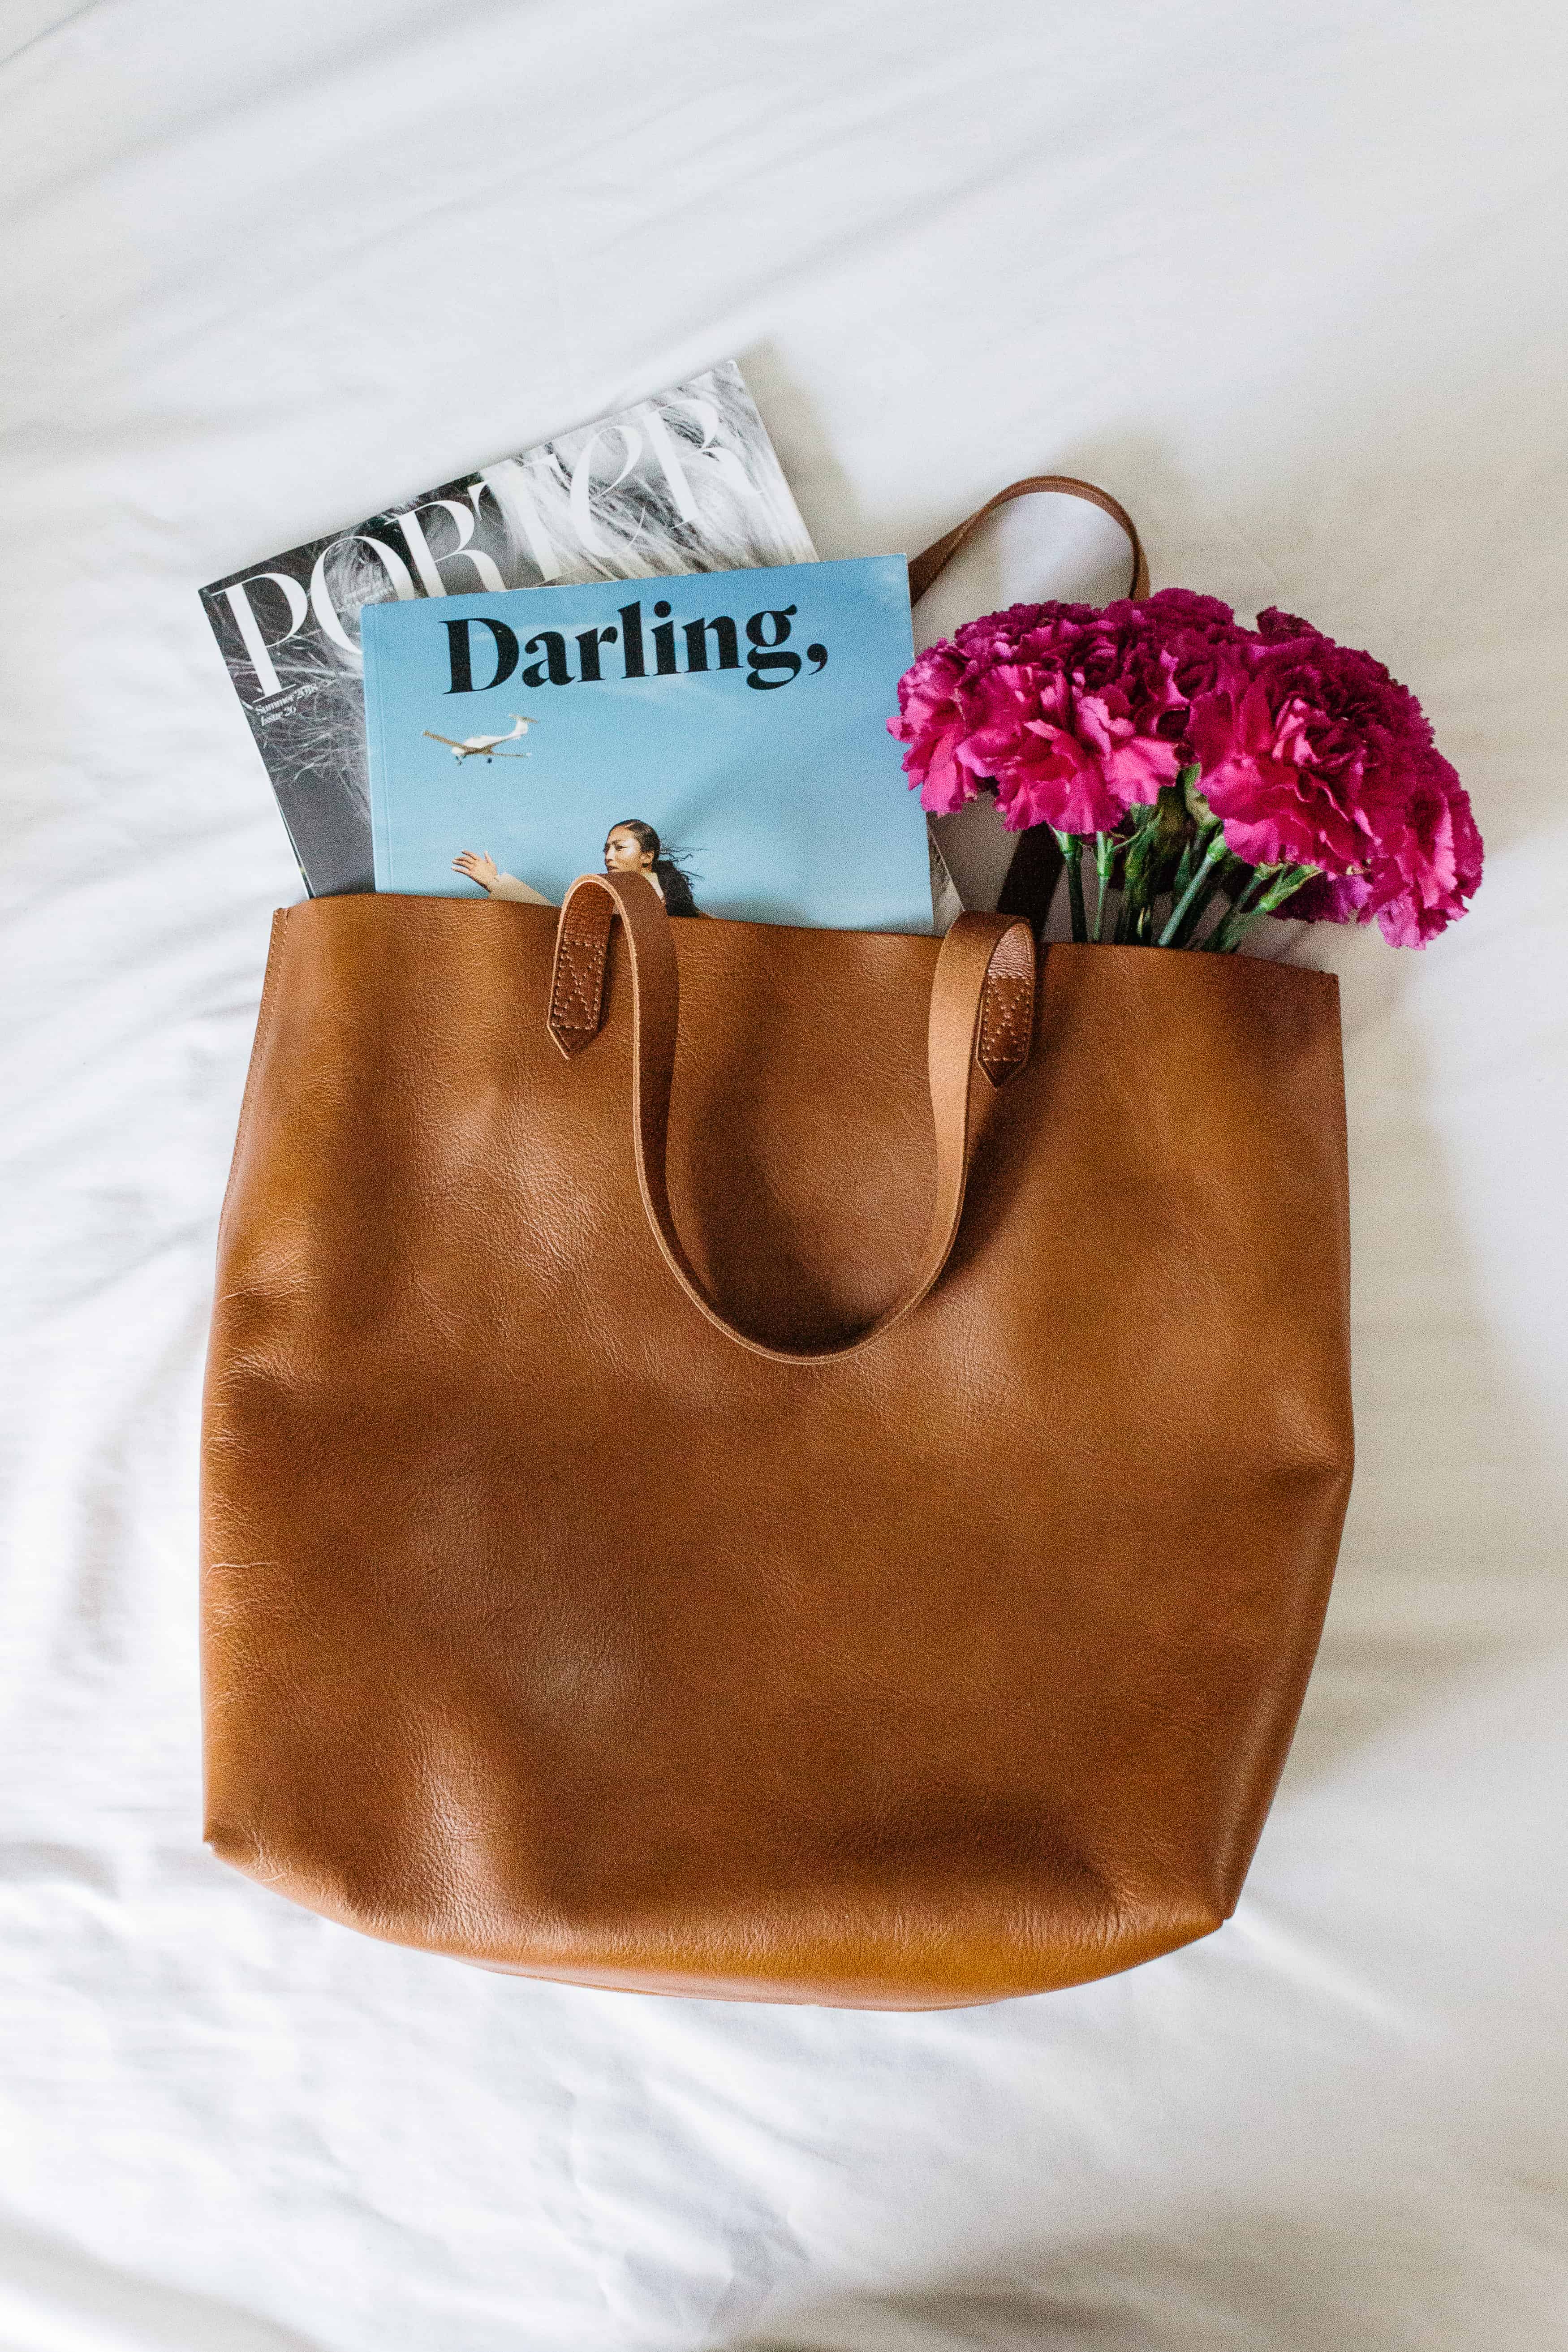 Add a Classic Tote to Your Personal Handbag Collection